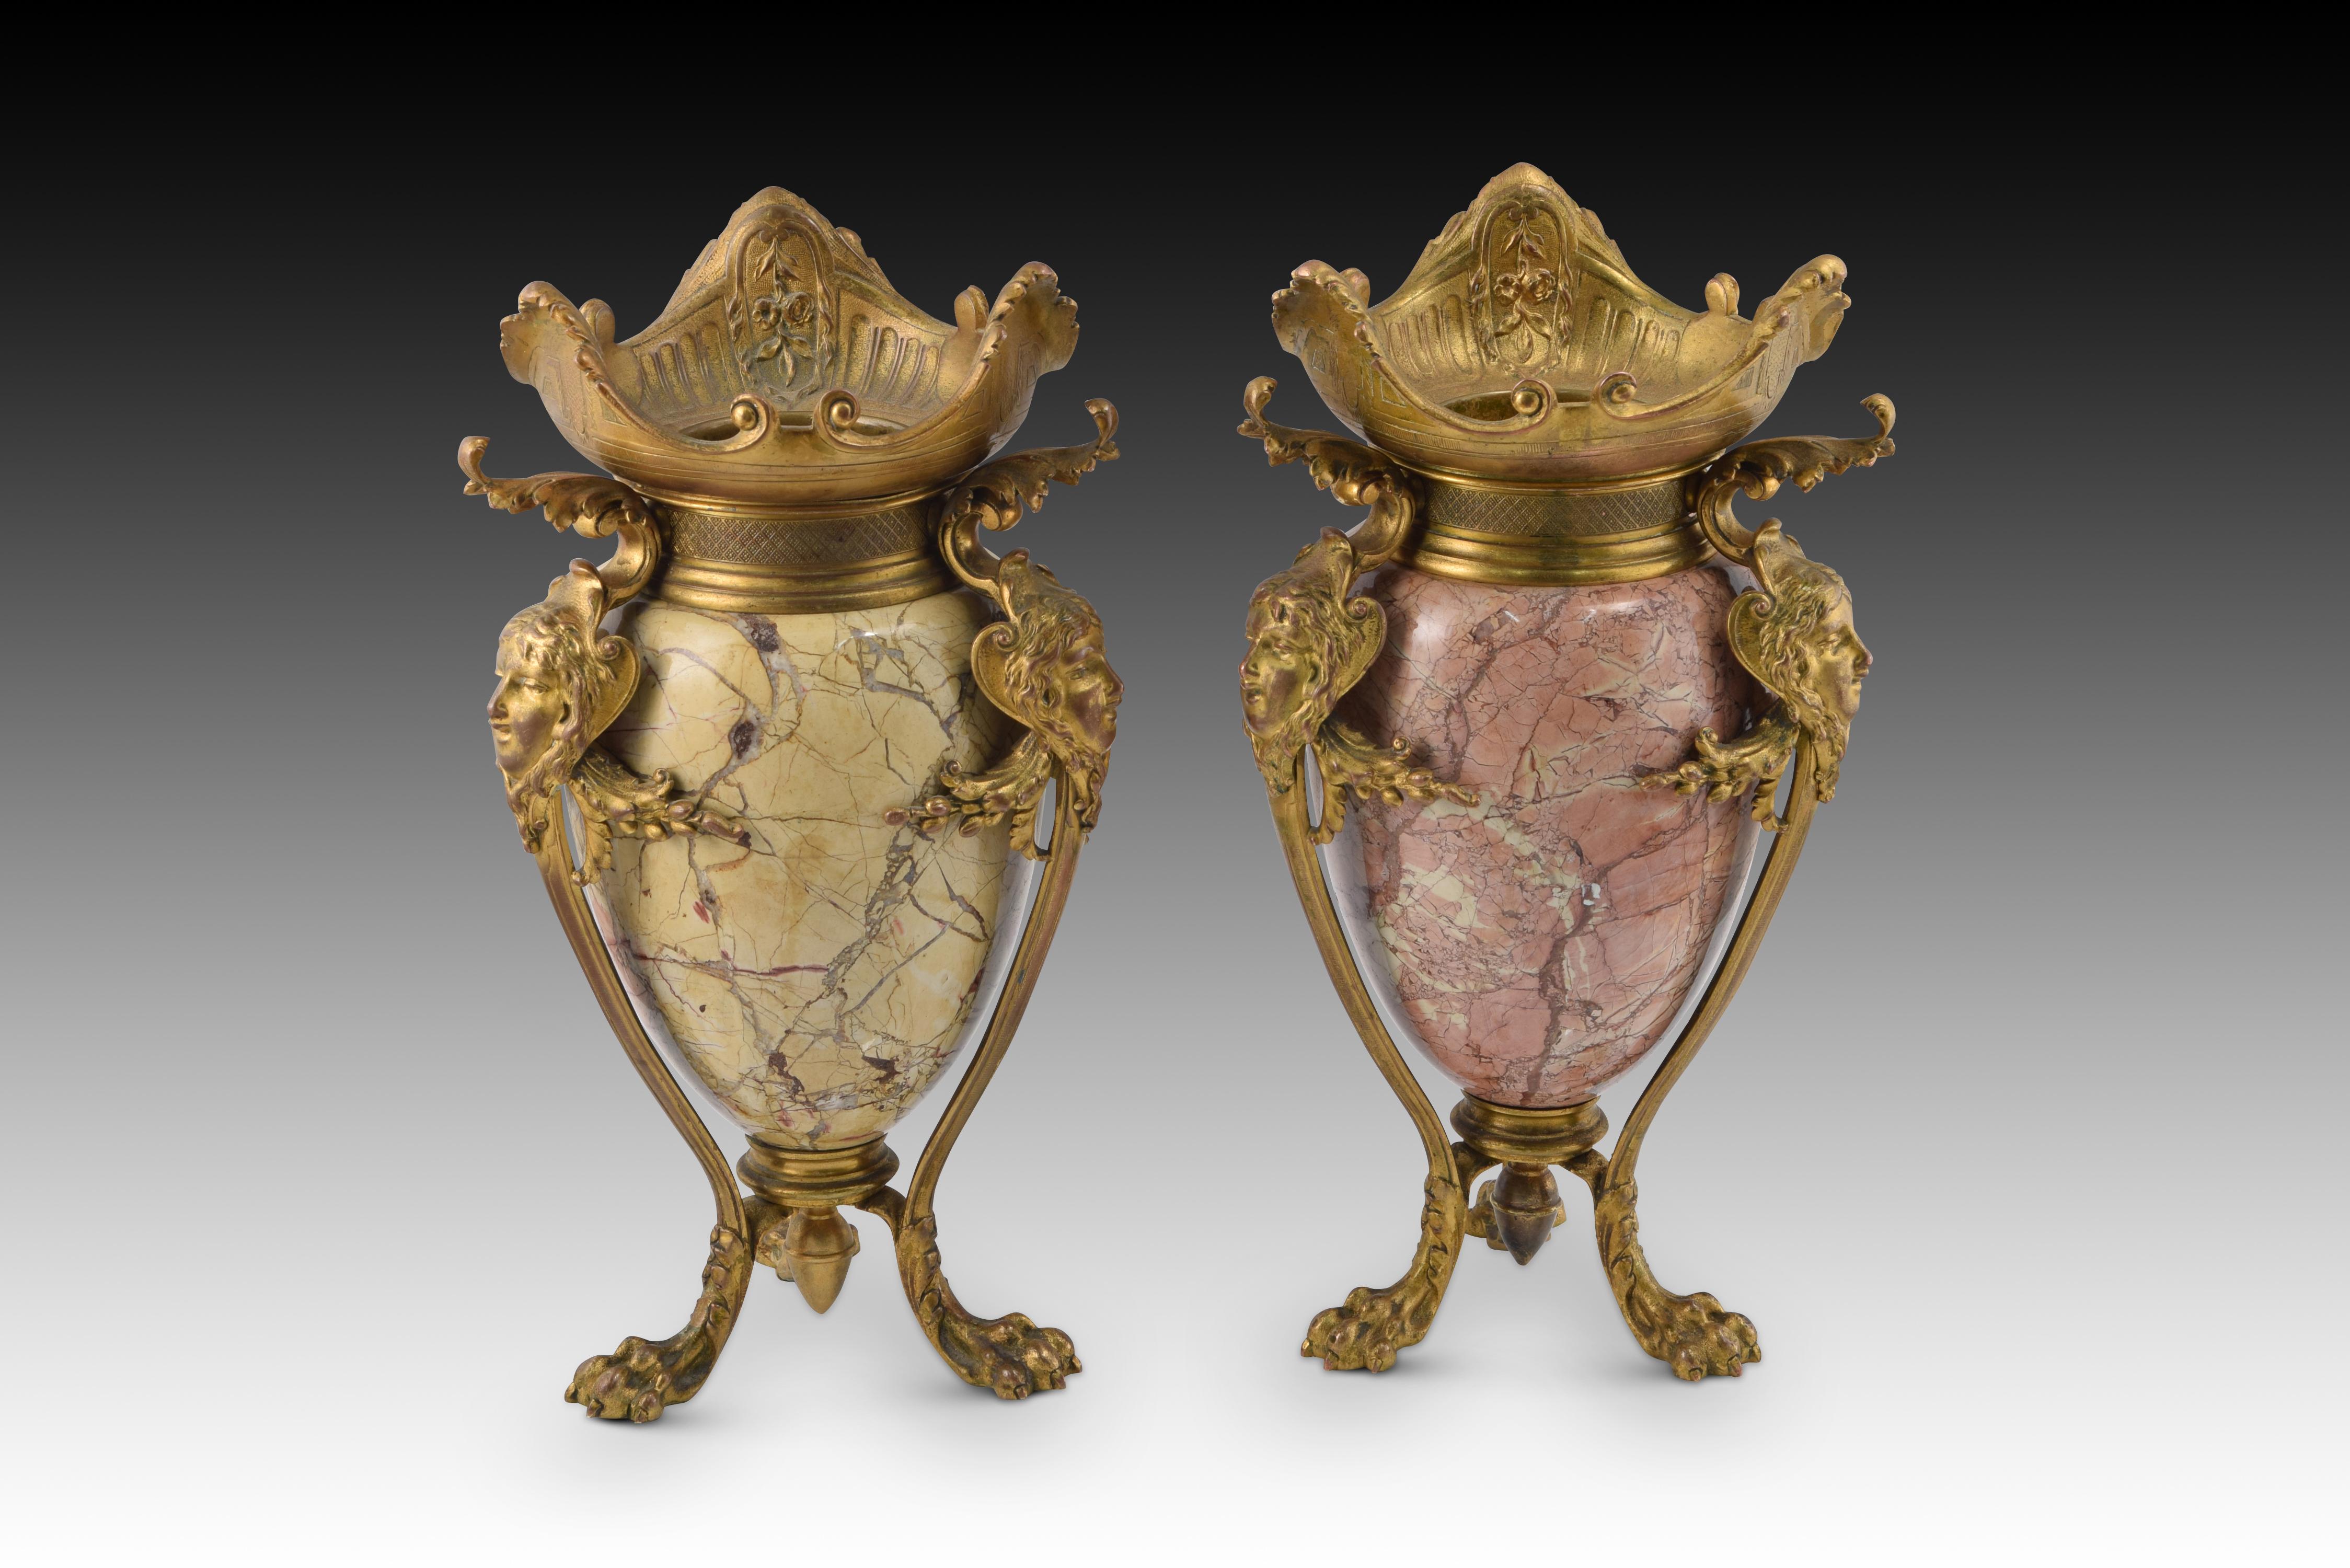 Neoclassical Revival Pair of Vases. Gilded Bronze, Veined Marble. France, Late 19th Century